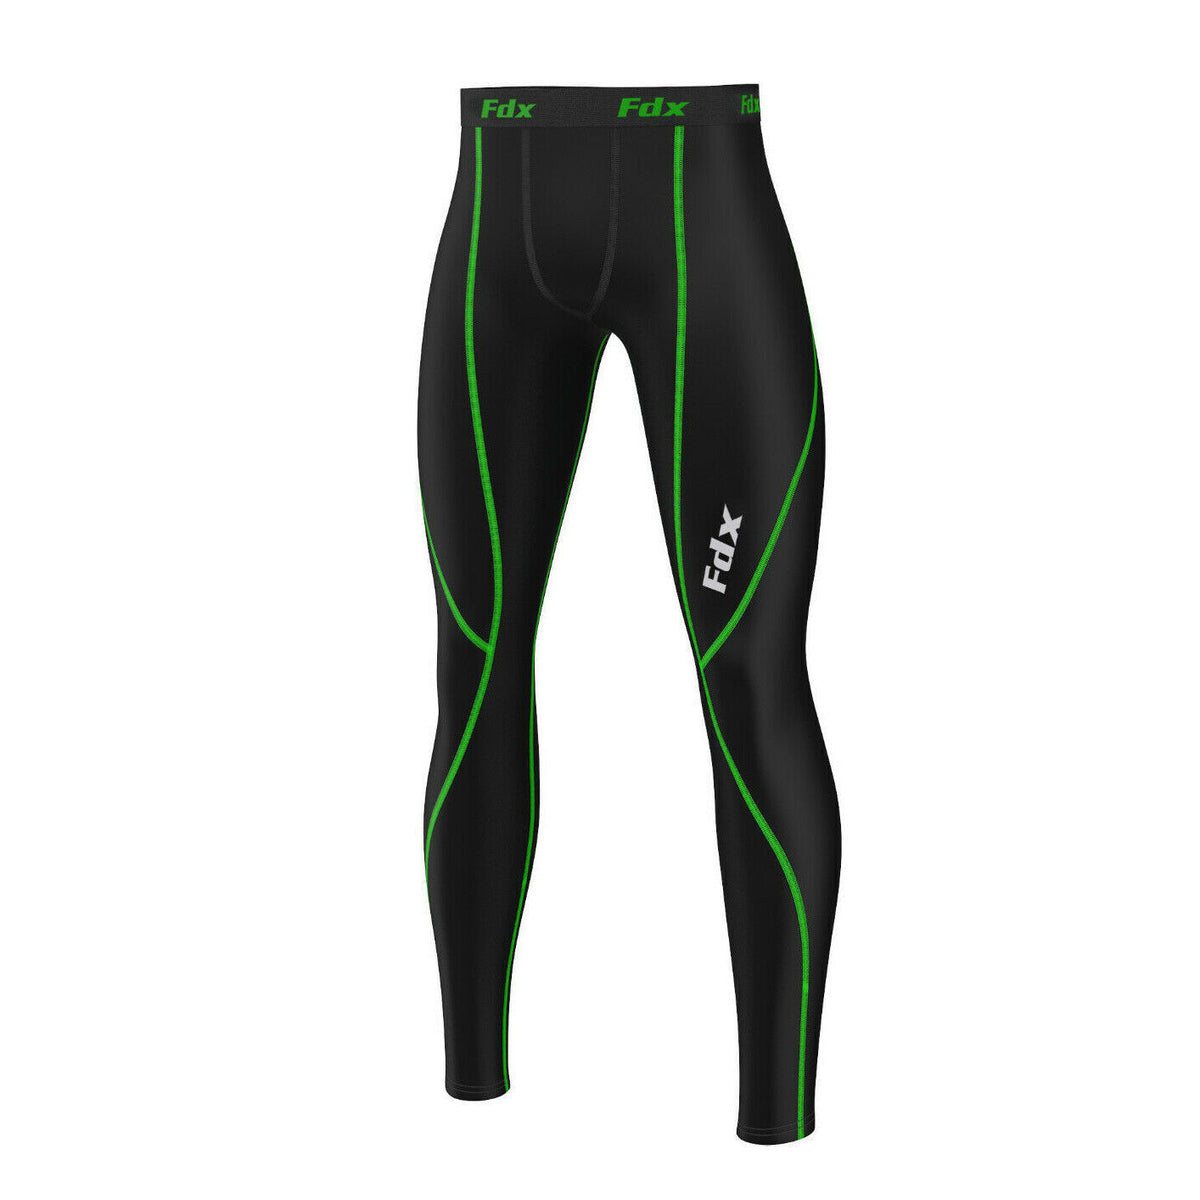 Sport Pants for Mens - Mens Body Armour Compression Base layer Tights Sports Leggin Under Gear trouser